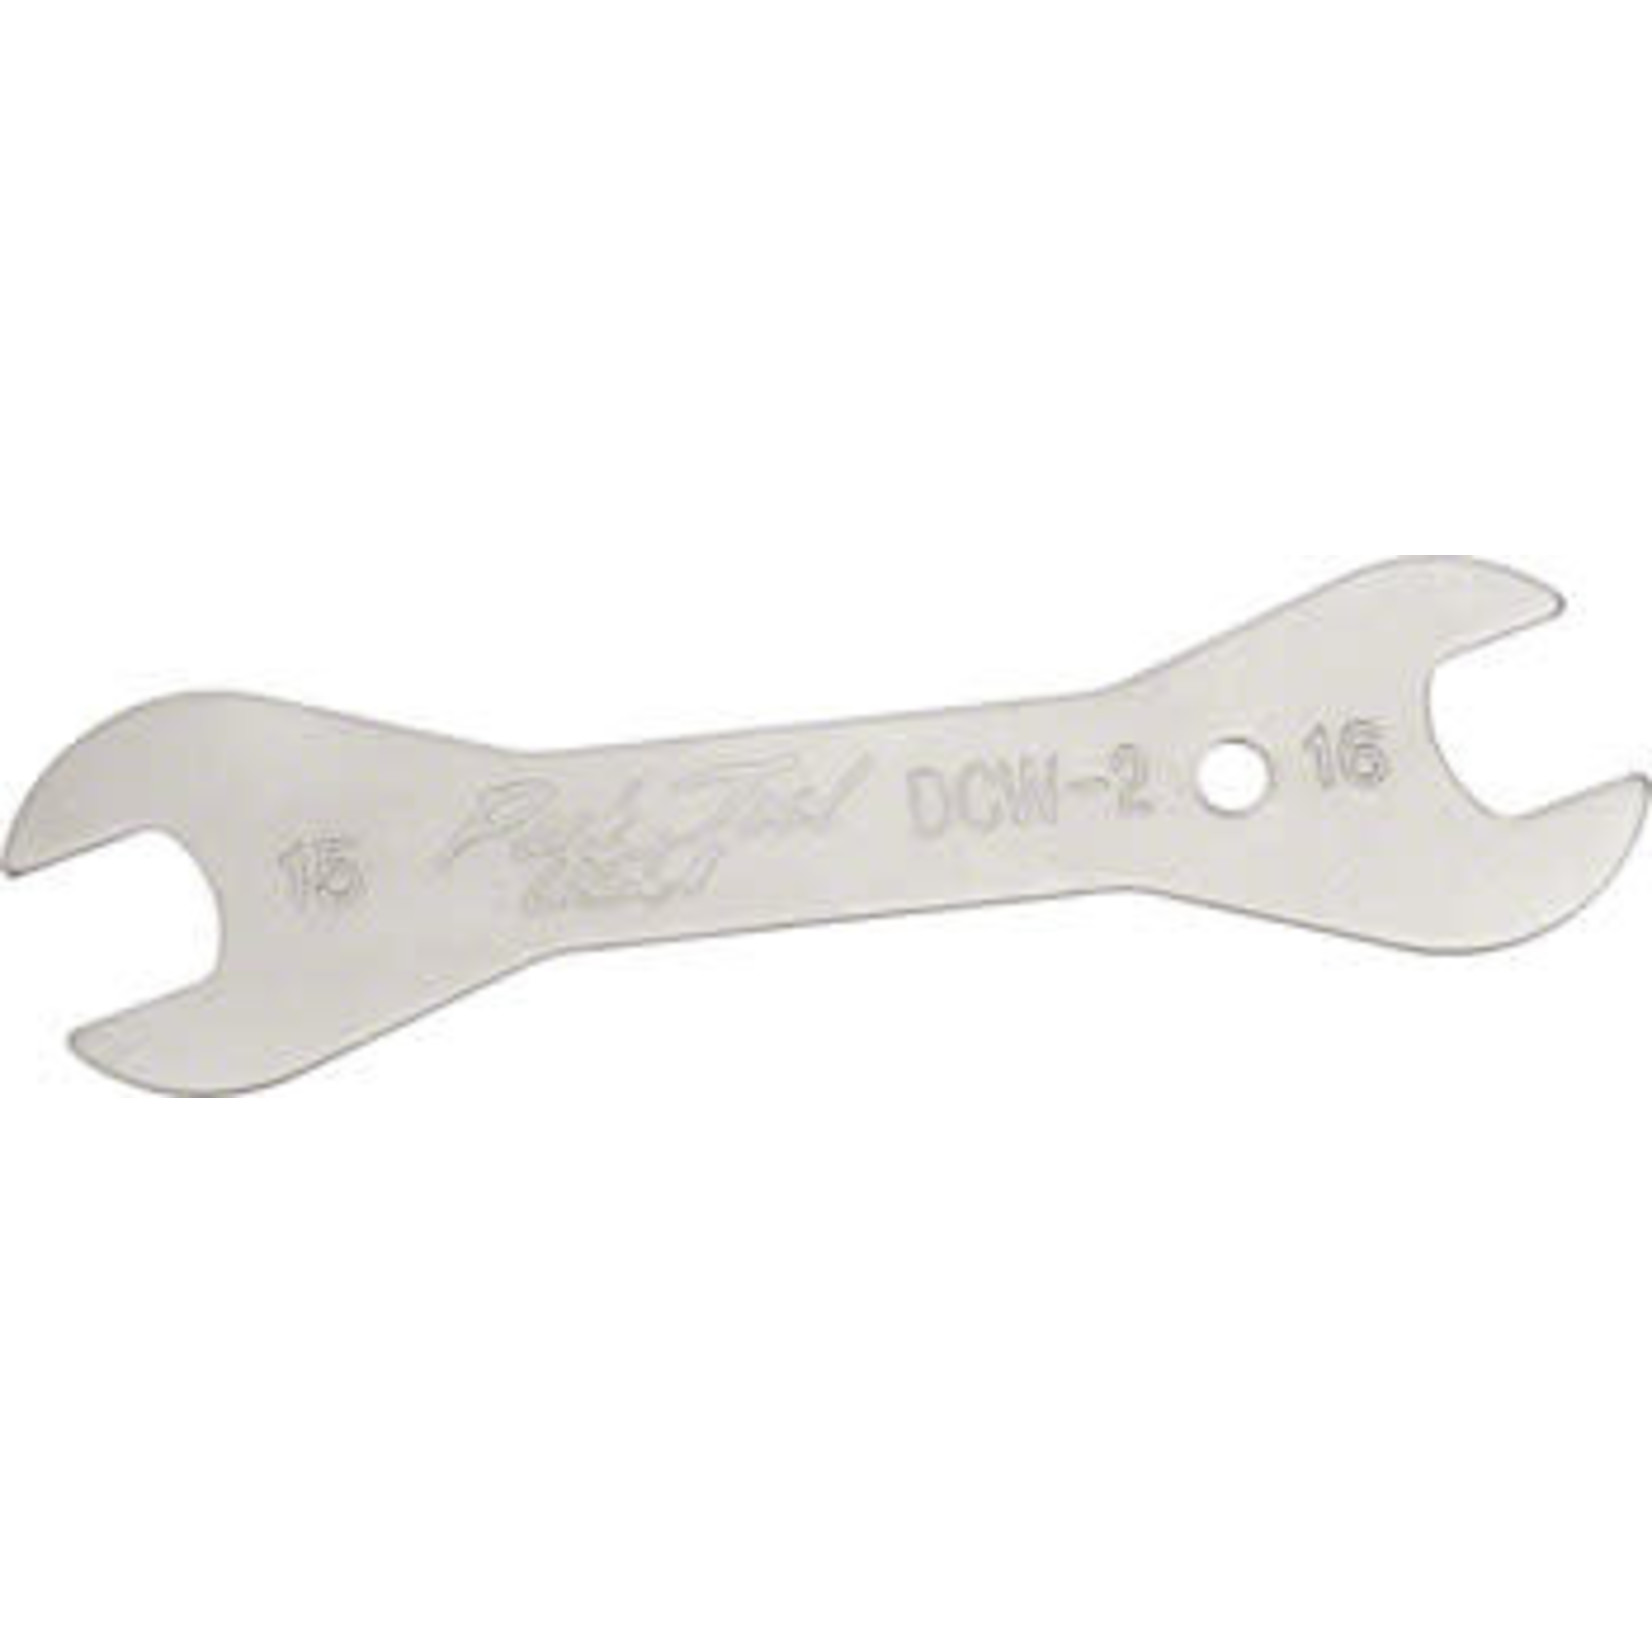 Park Tool DCW-2 Double-Ended Cone Wrench: 15 and 16mm